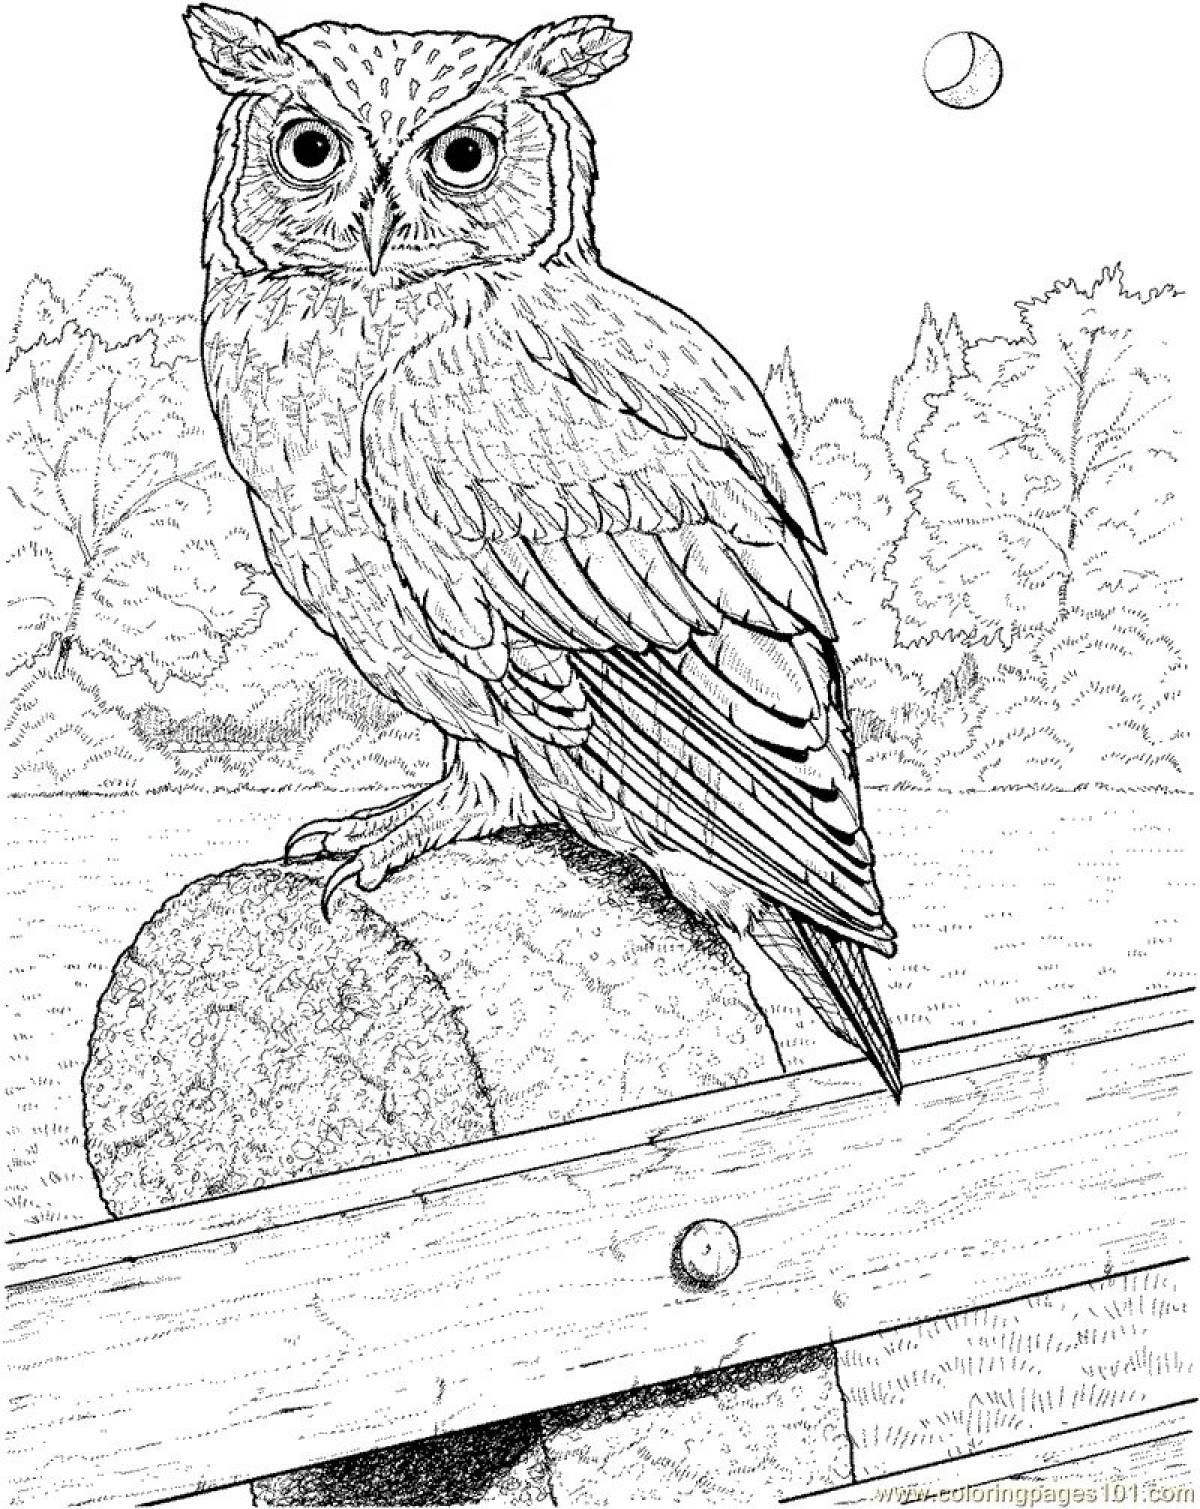 Coloring book magnanimous long-eared owl